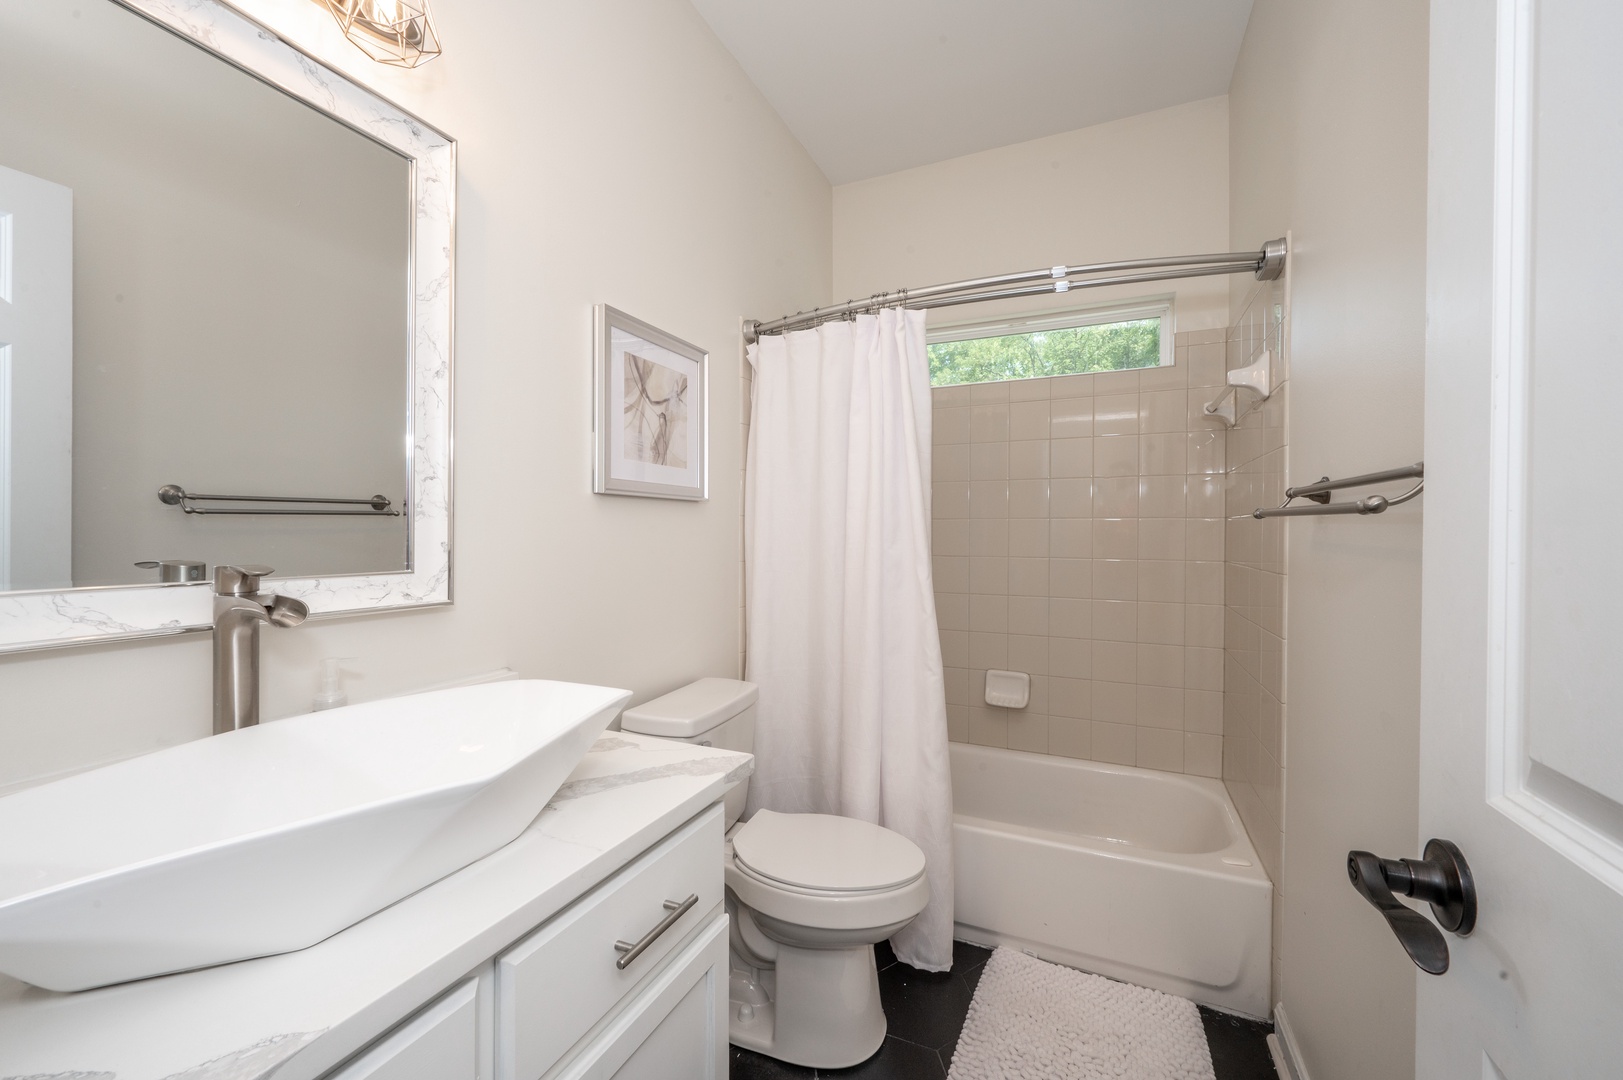 The 2nd floor full bath offers a stylish vanity & shower/tub combo